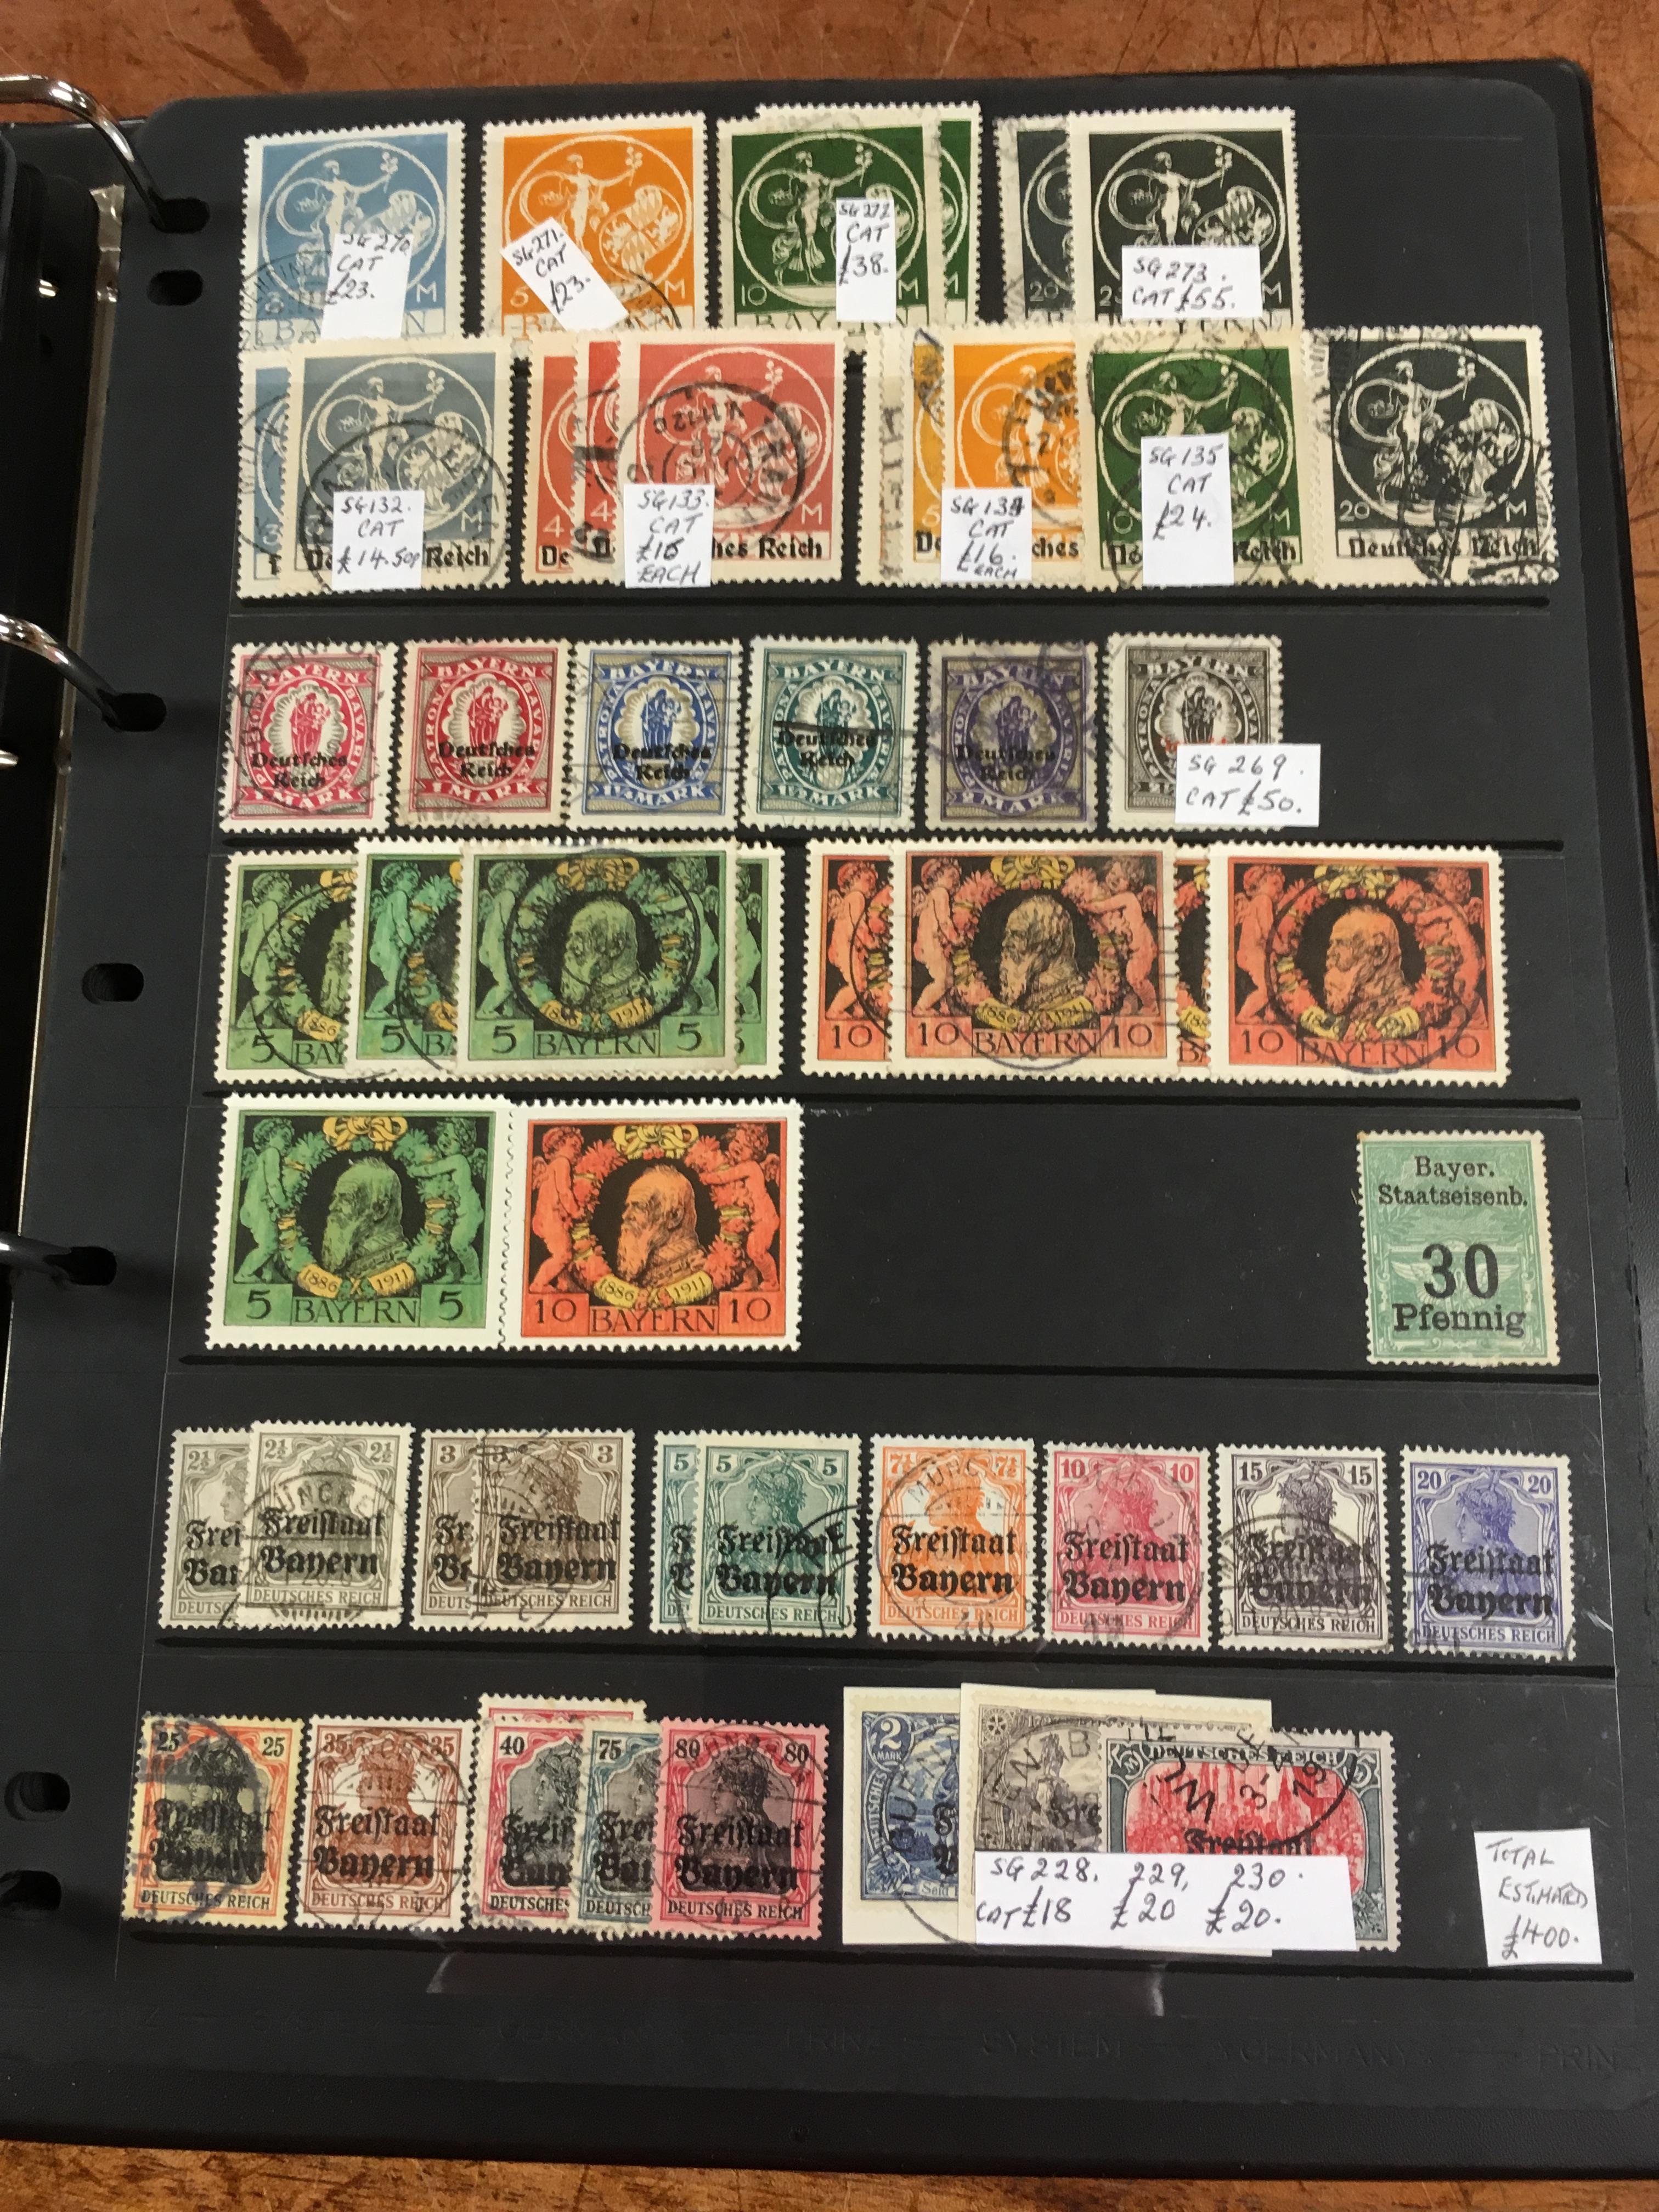 GERMAN STATES: BINDER WITH AN EXTENSIVE COLLECTION, MOST STATES WELL REPRESENTED WITH SOME DUPLICATI - Image 3 of 9